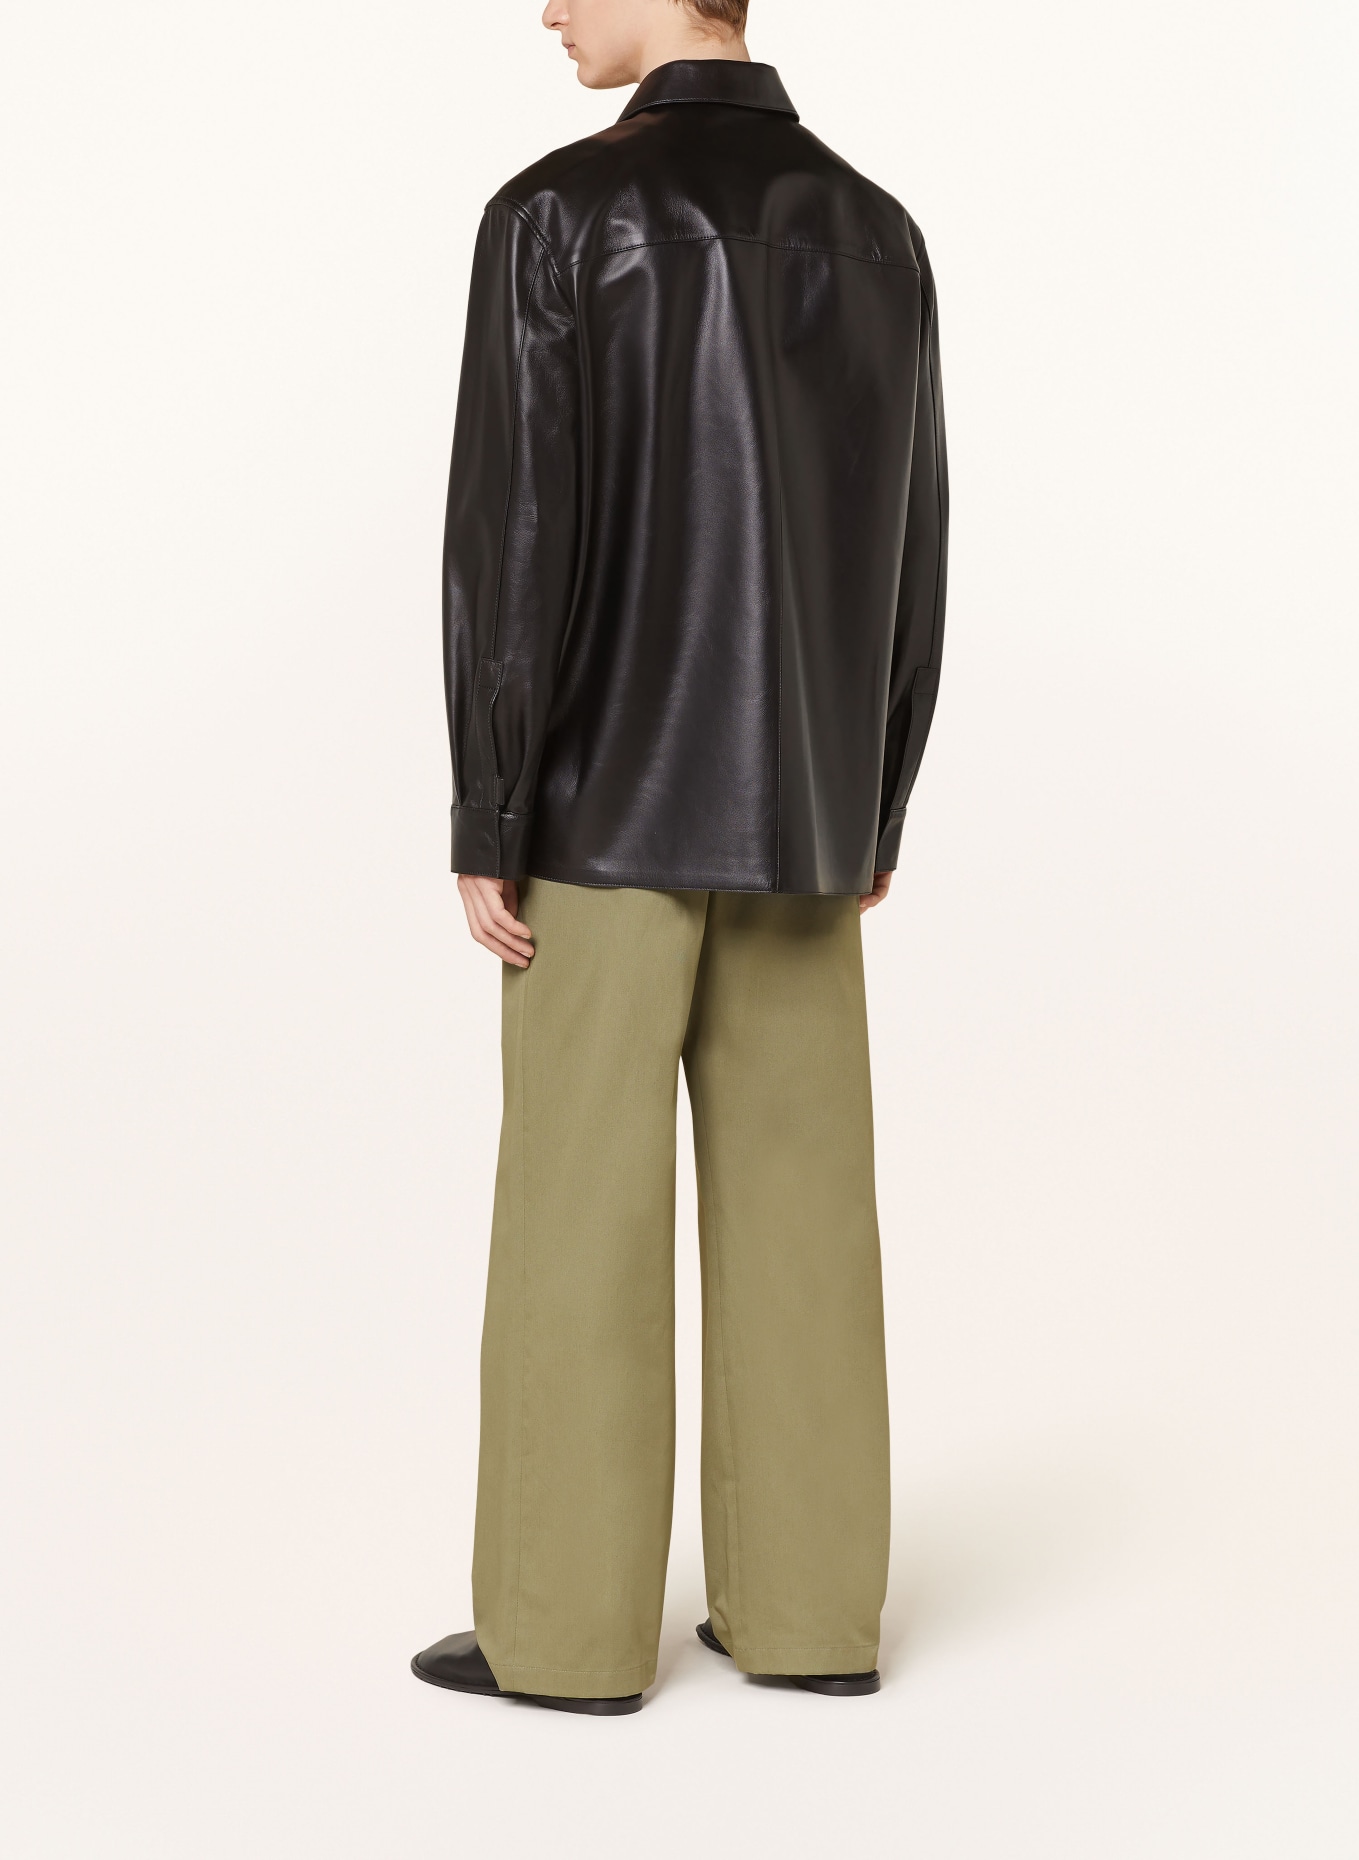 LOEWE Hose Relaxed Fit, Farbe: OLIV (Bild 3)